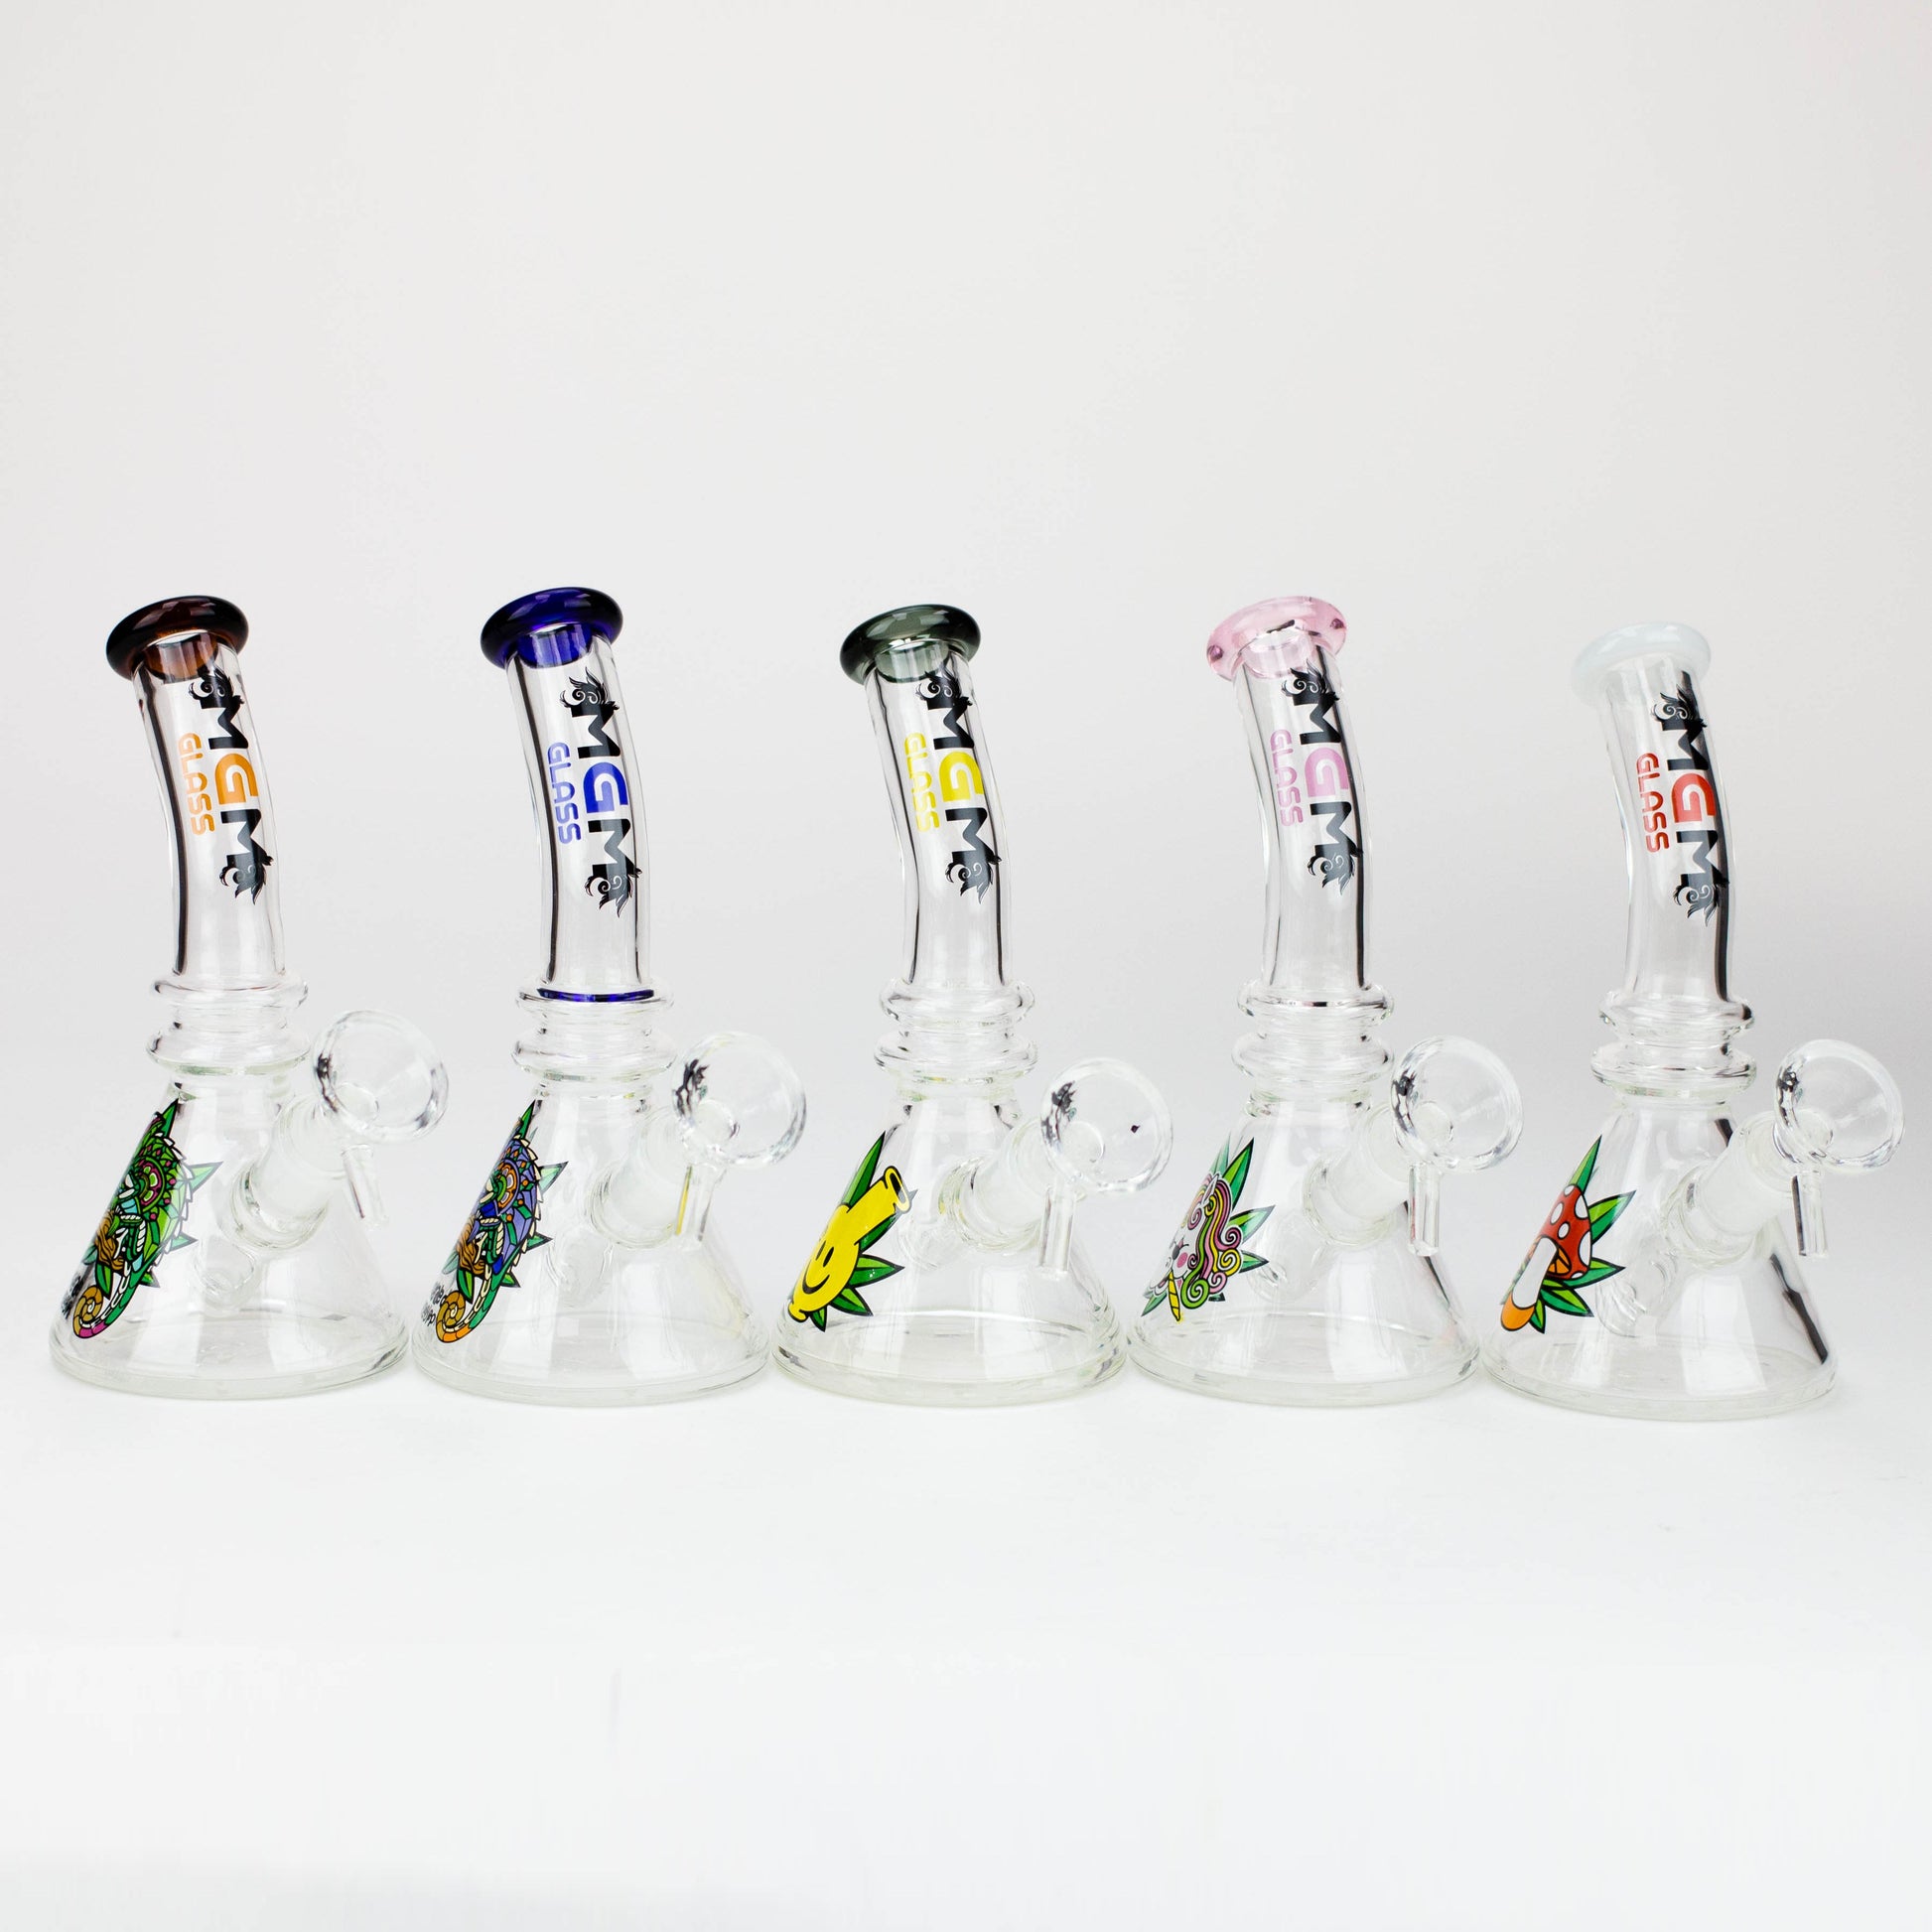 6.3" MGM Glass 2-in-1 bubbler with Graphic [C2671]_5